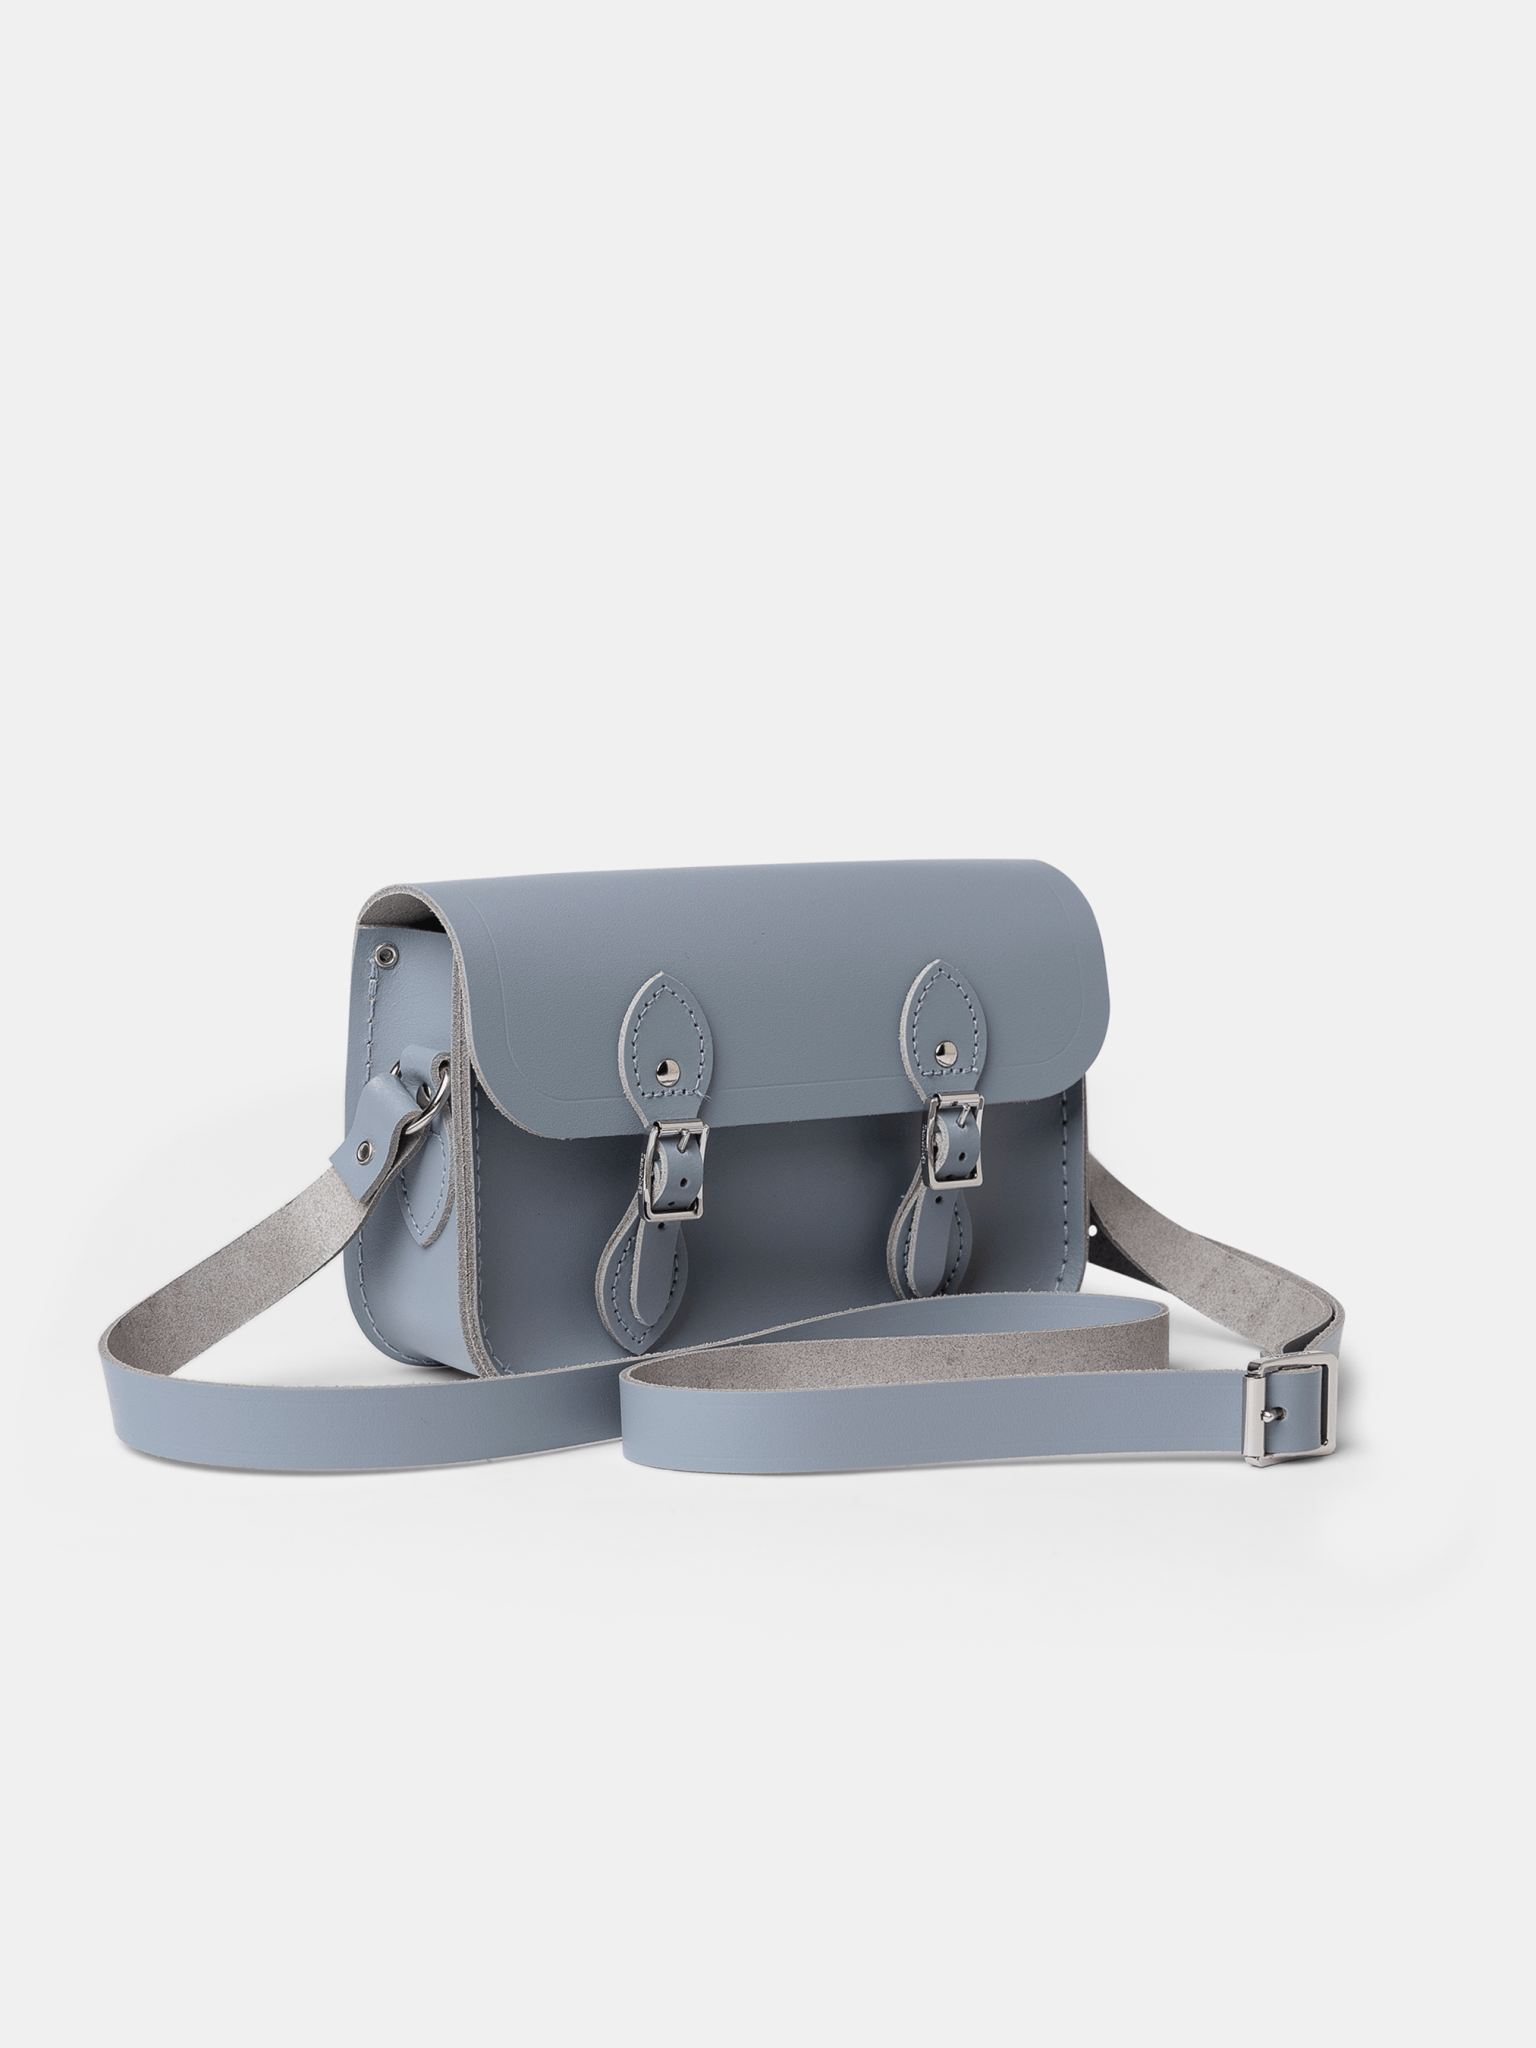 The Little One - French Grey - Cambridge Satchel US Store